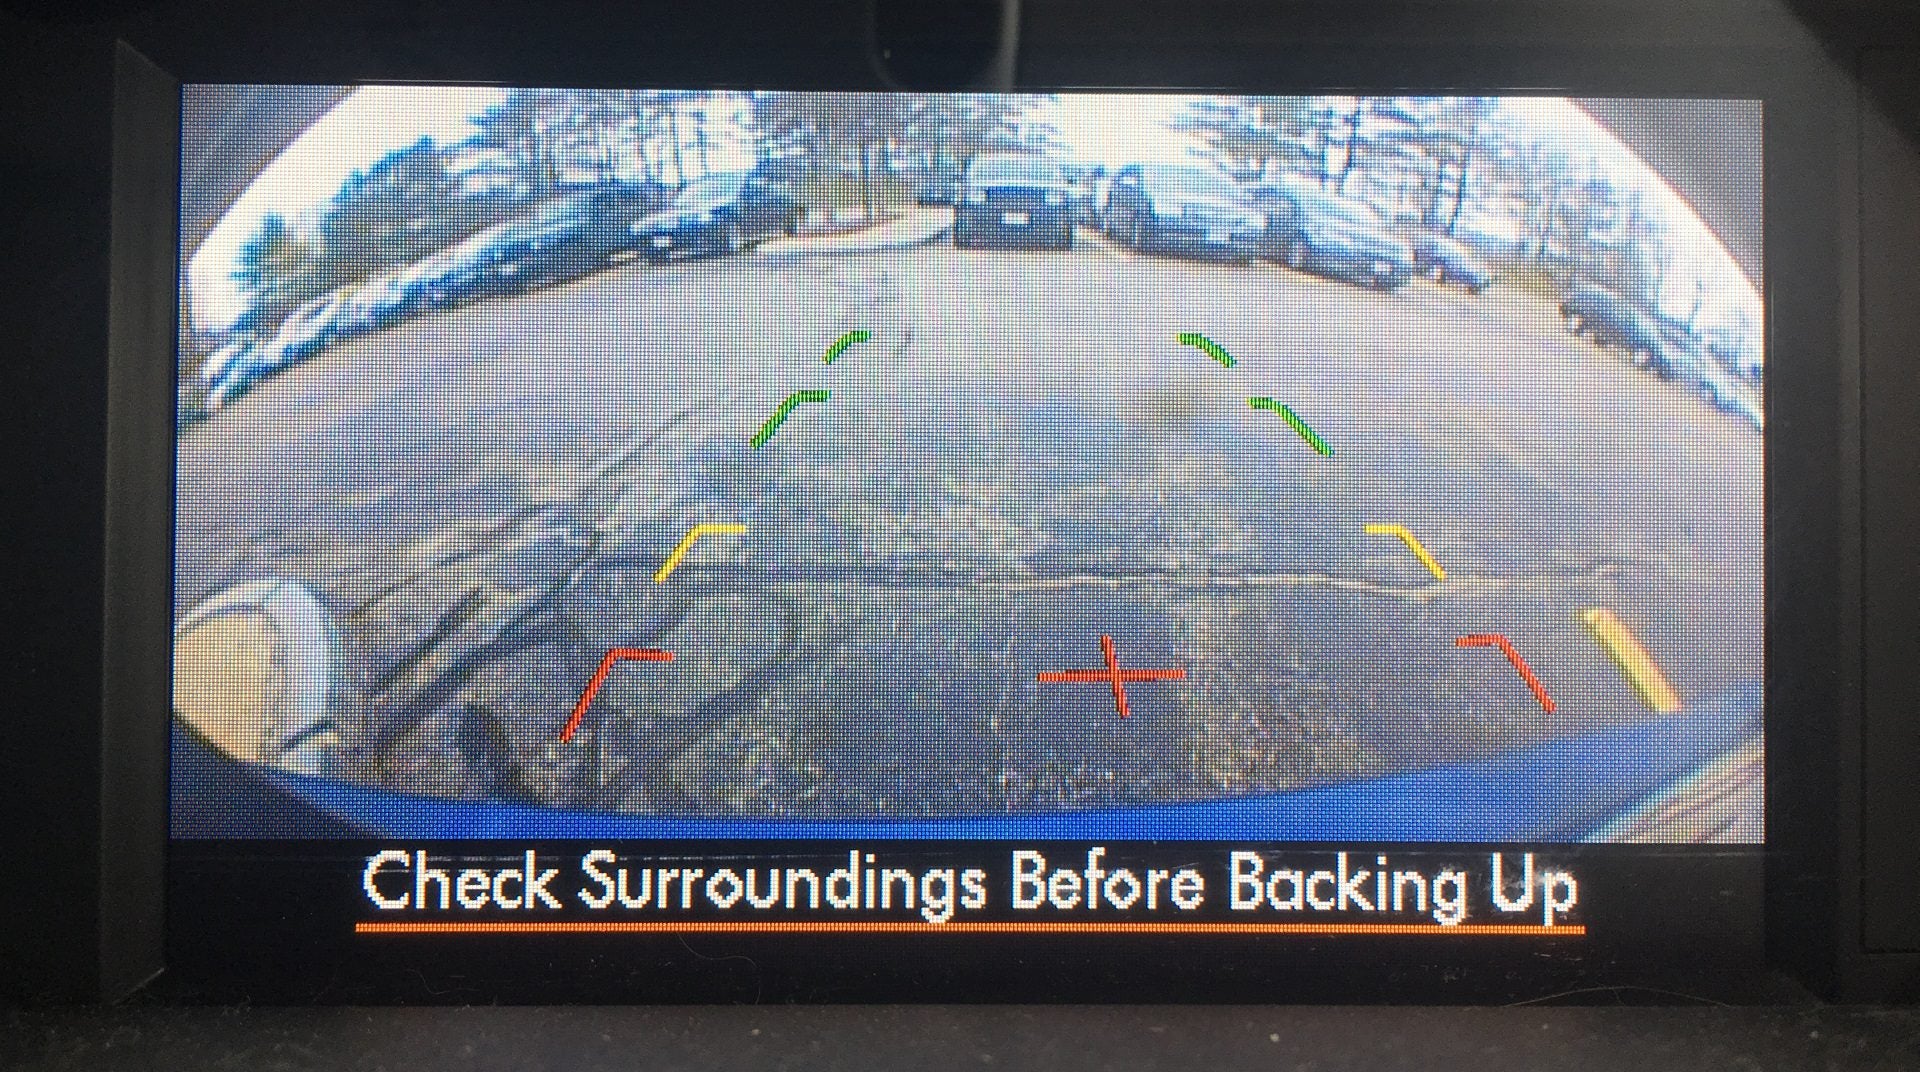 Rearview Cameras Are Now Required in All New Cars Sold in the U.S.